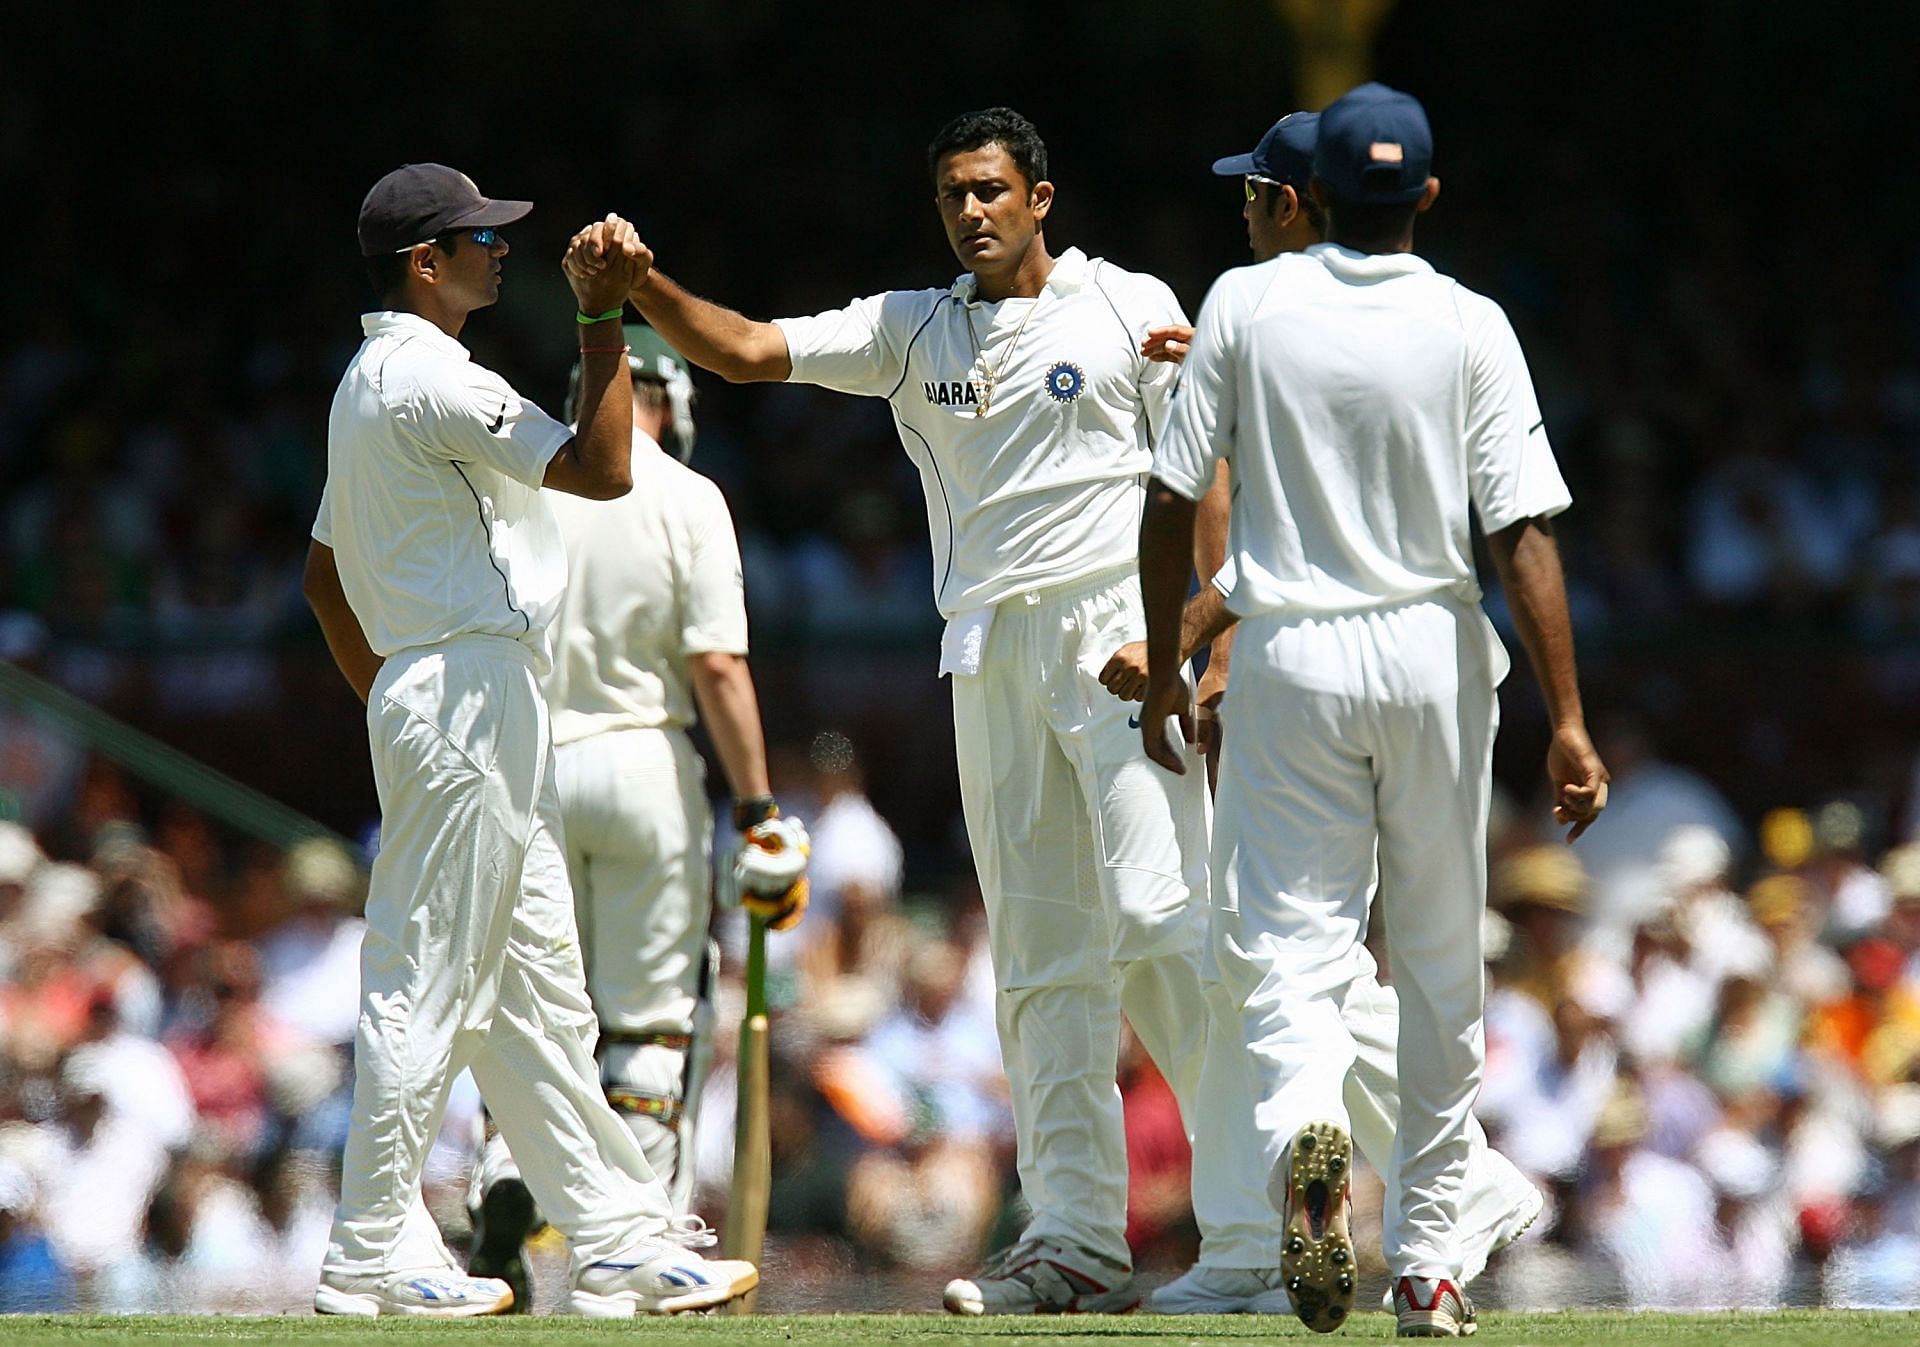 Anil Kumble celebrates a wicket. Pic: Getty Images